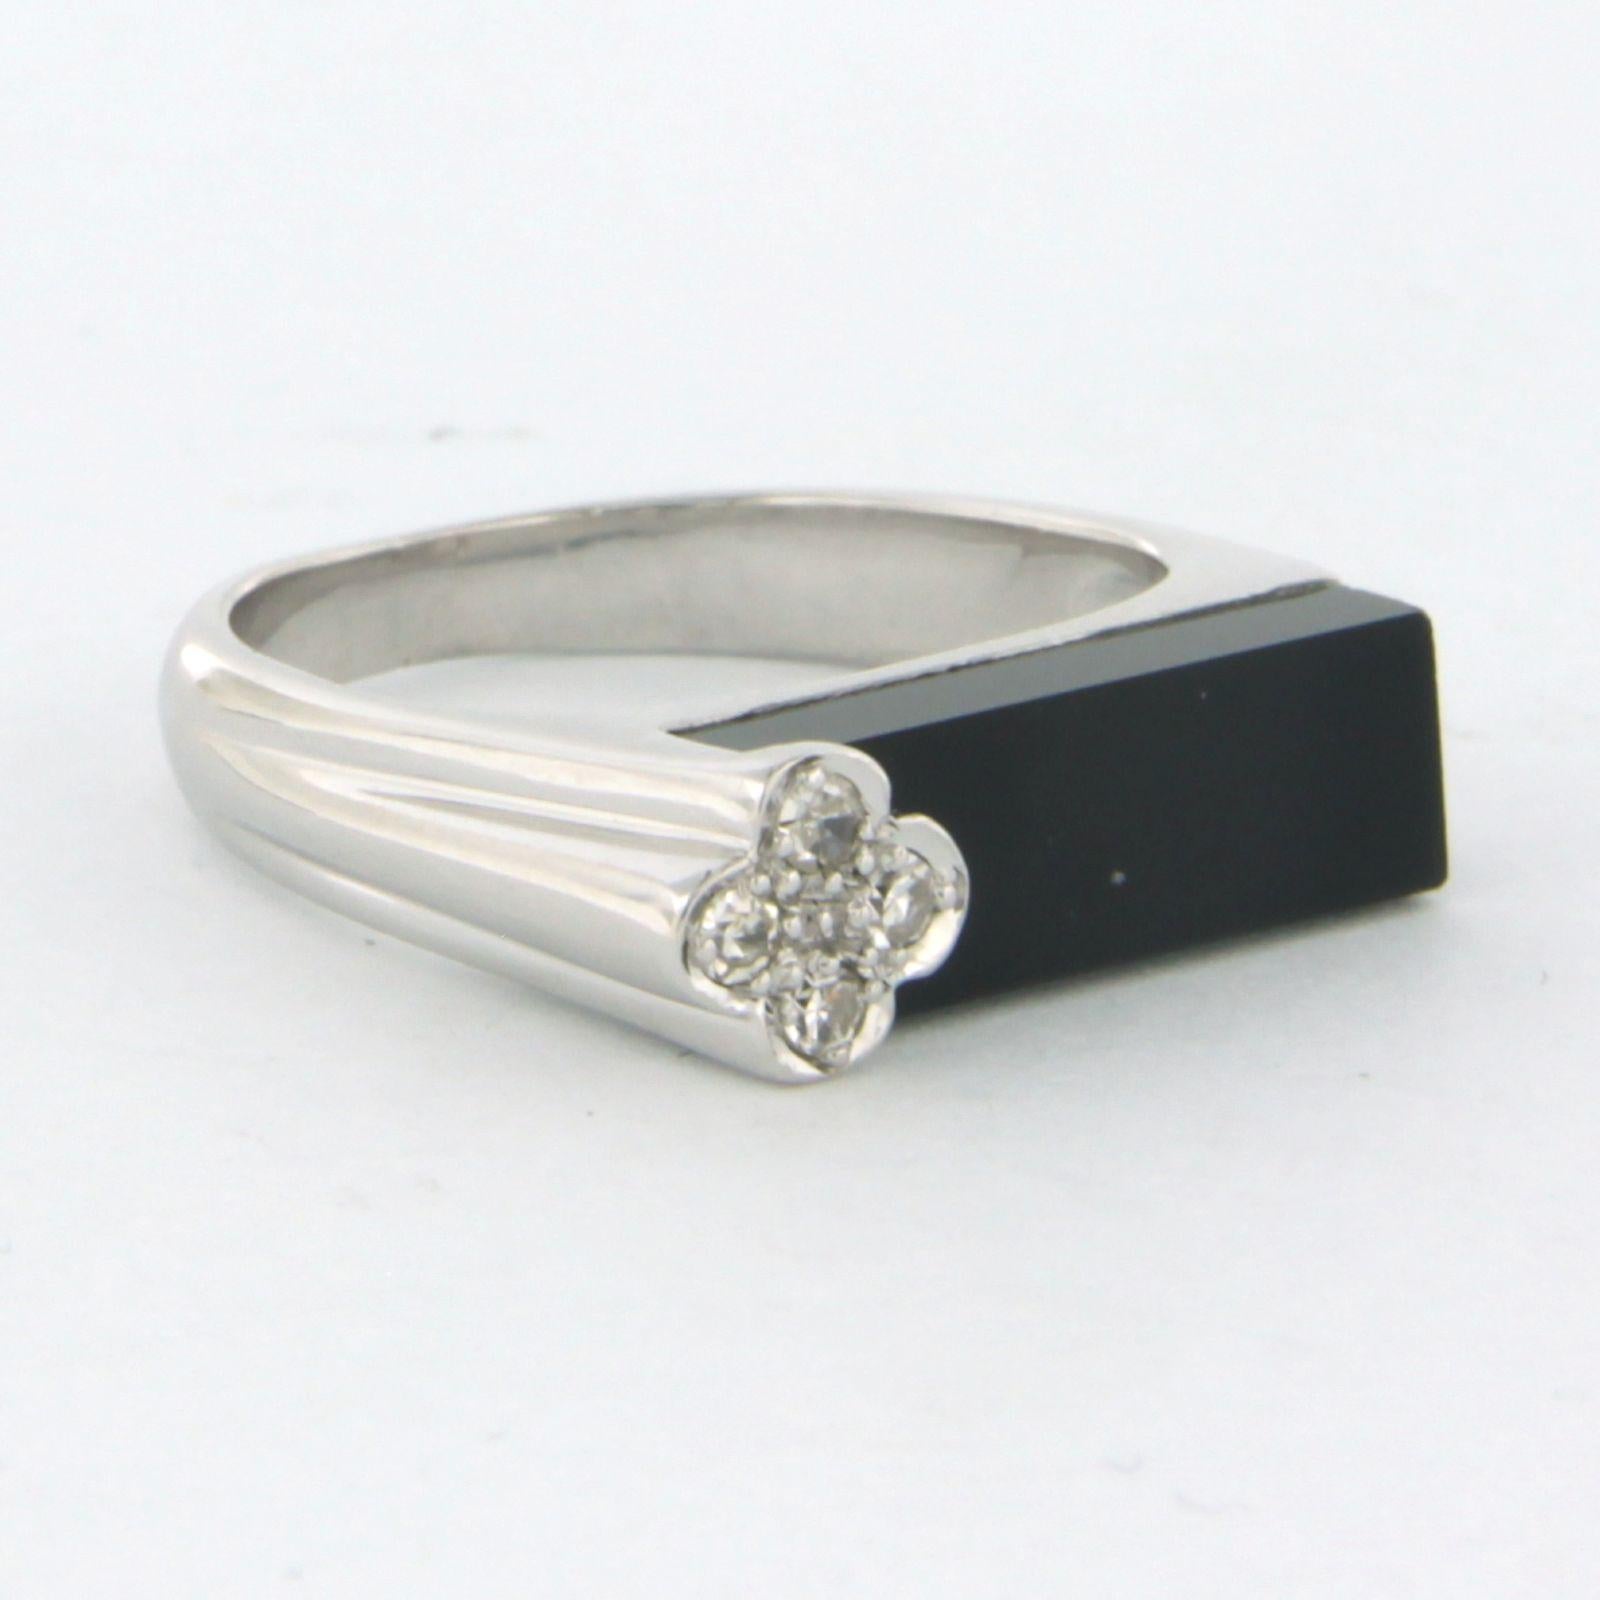 14 kt white gold ring with onyx and single cut diamond 0.06 ct F/G VS-SI - ring size 5 (15.5/49)

detailed description

the top of the ring is 5.0 mm wide and 4.0 mm high

Ring size 5 (15.5/49), ring can be reduced a few sizes at cost price. Please